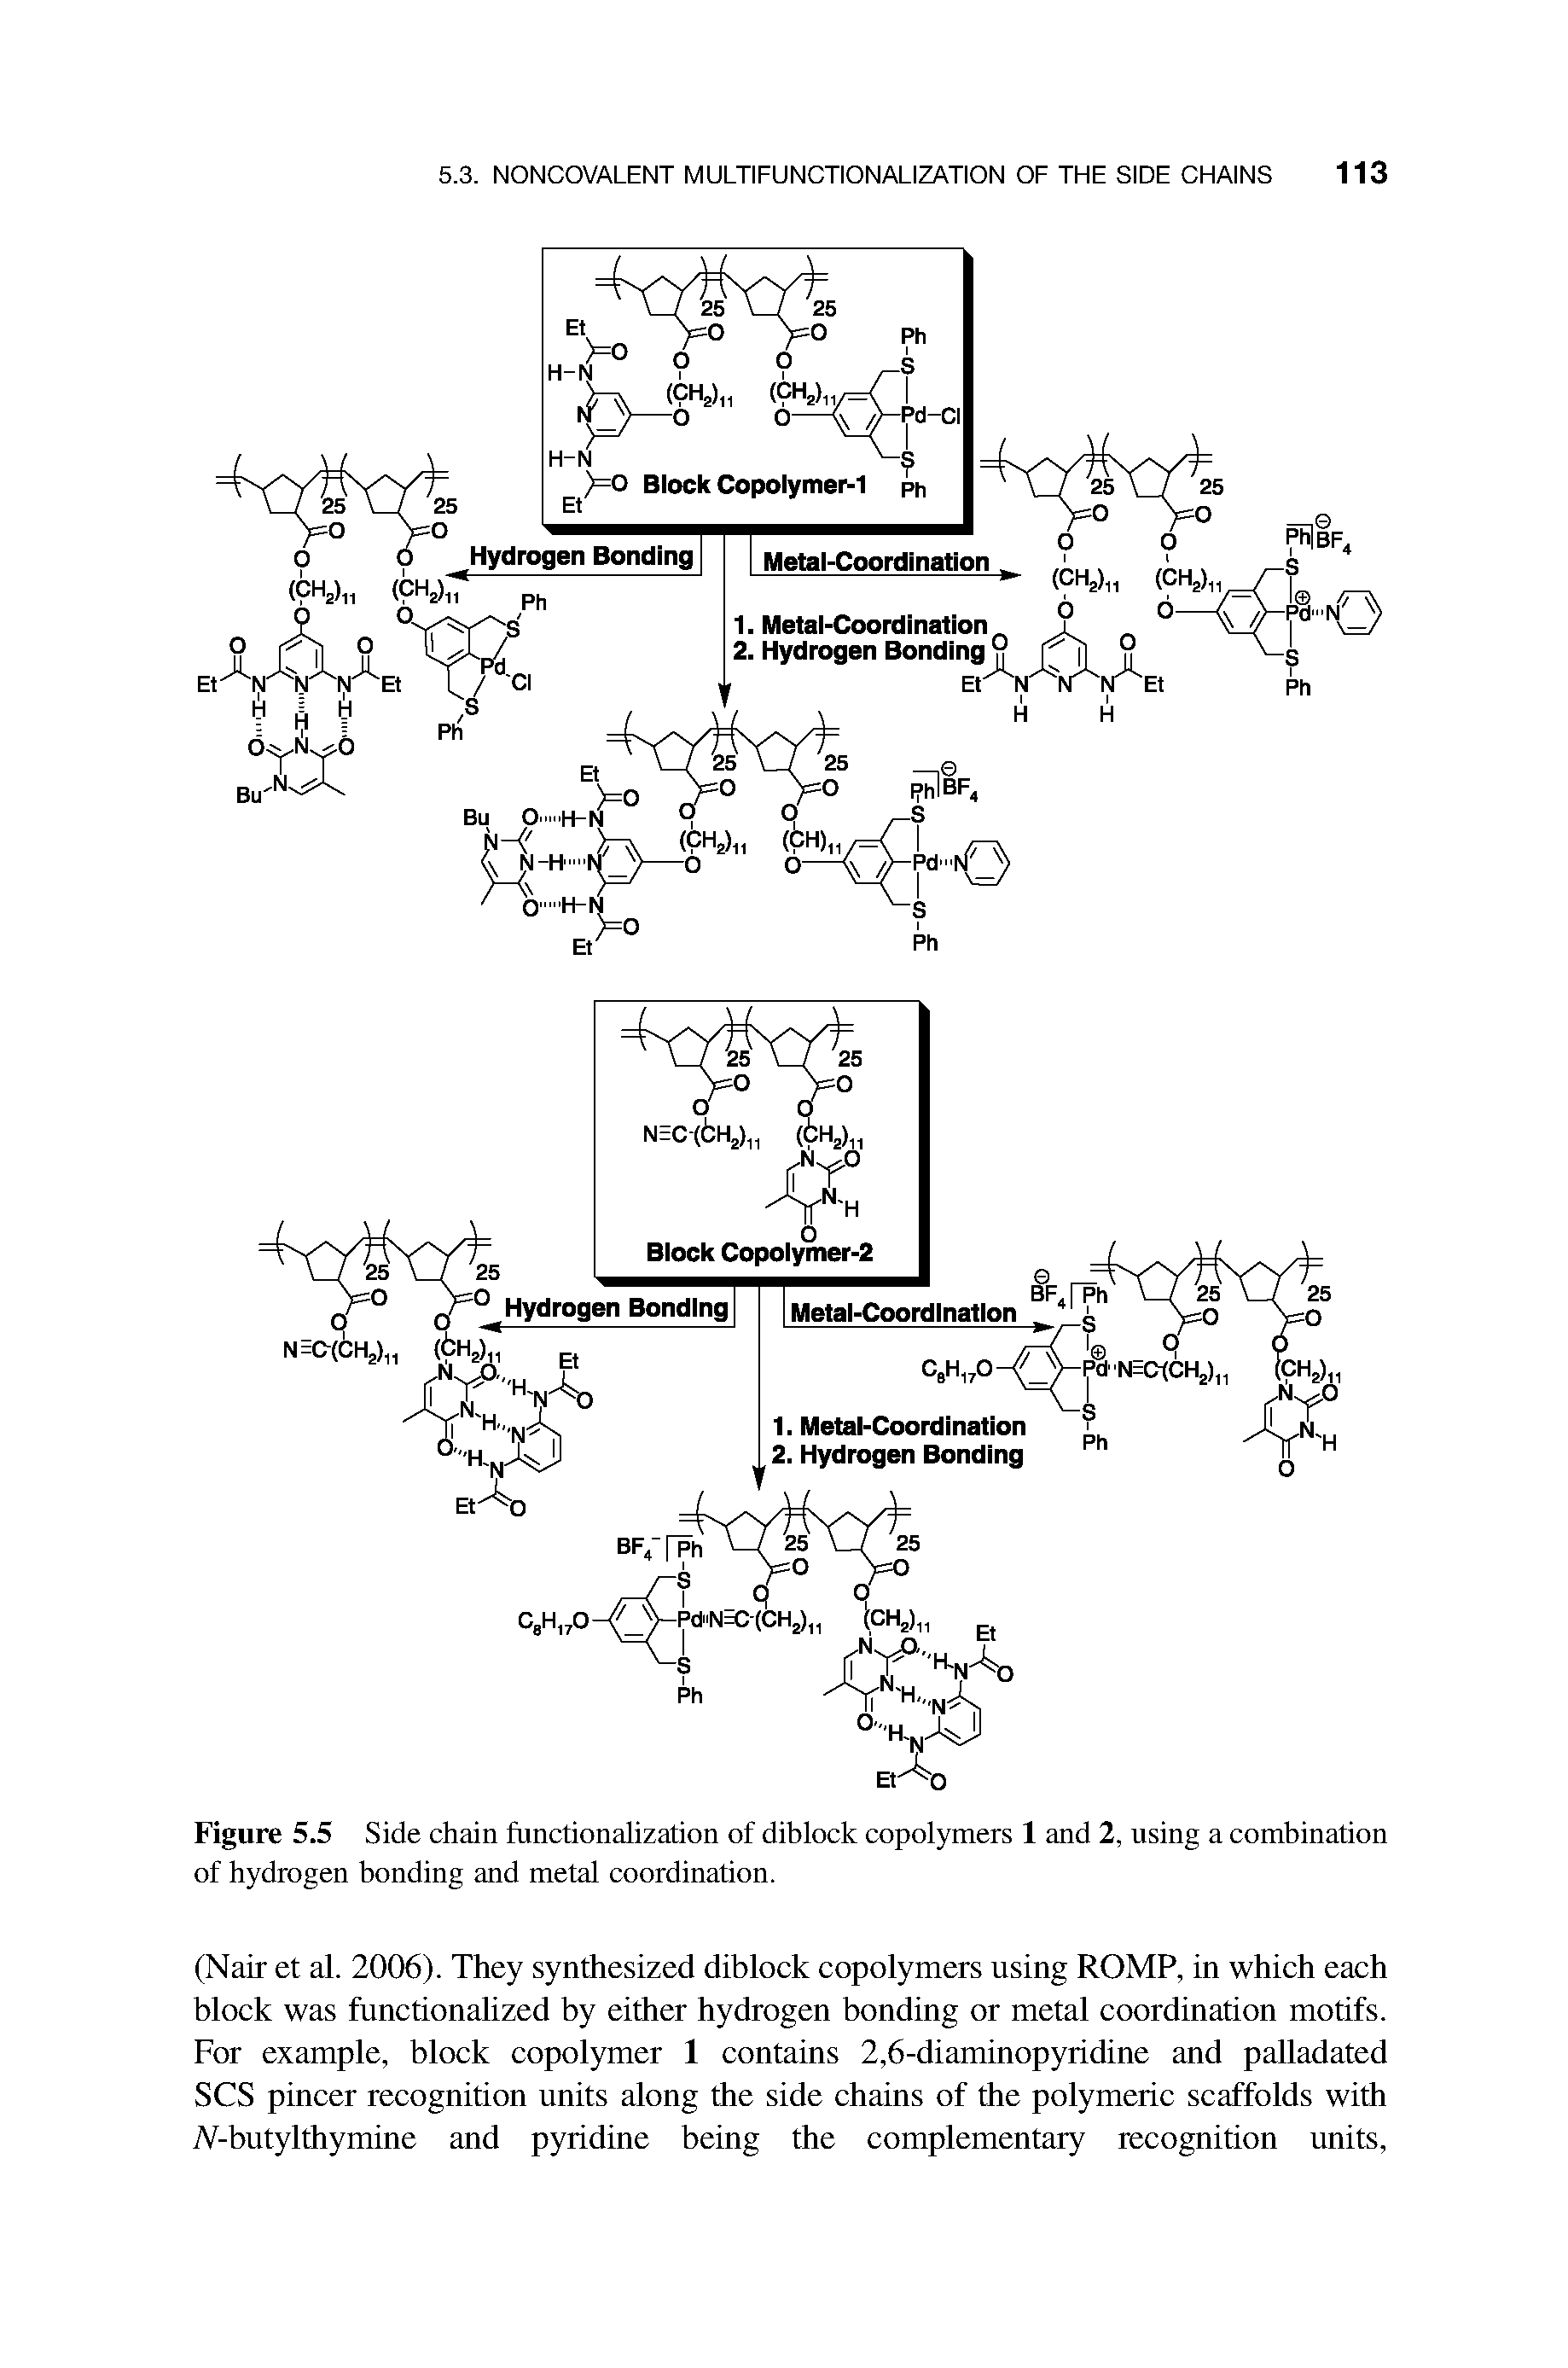 Figure 5.5 Side chain functionalization of diblock copolymers 1 and 2, using a combination of hydrogen bonding and metal coordination.